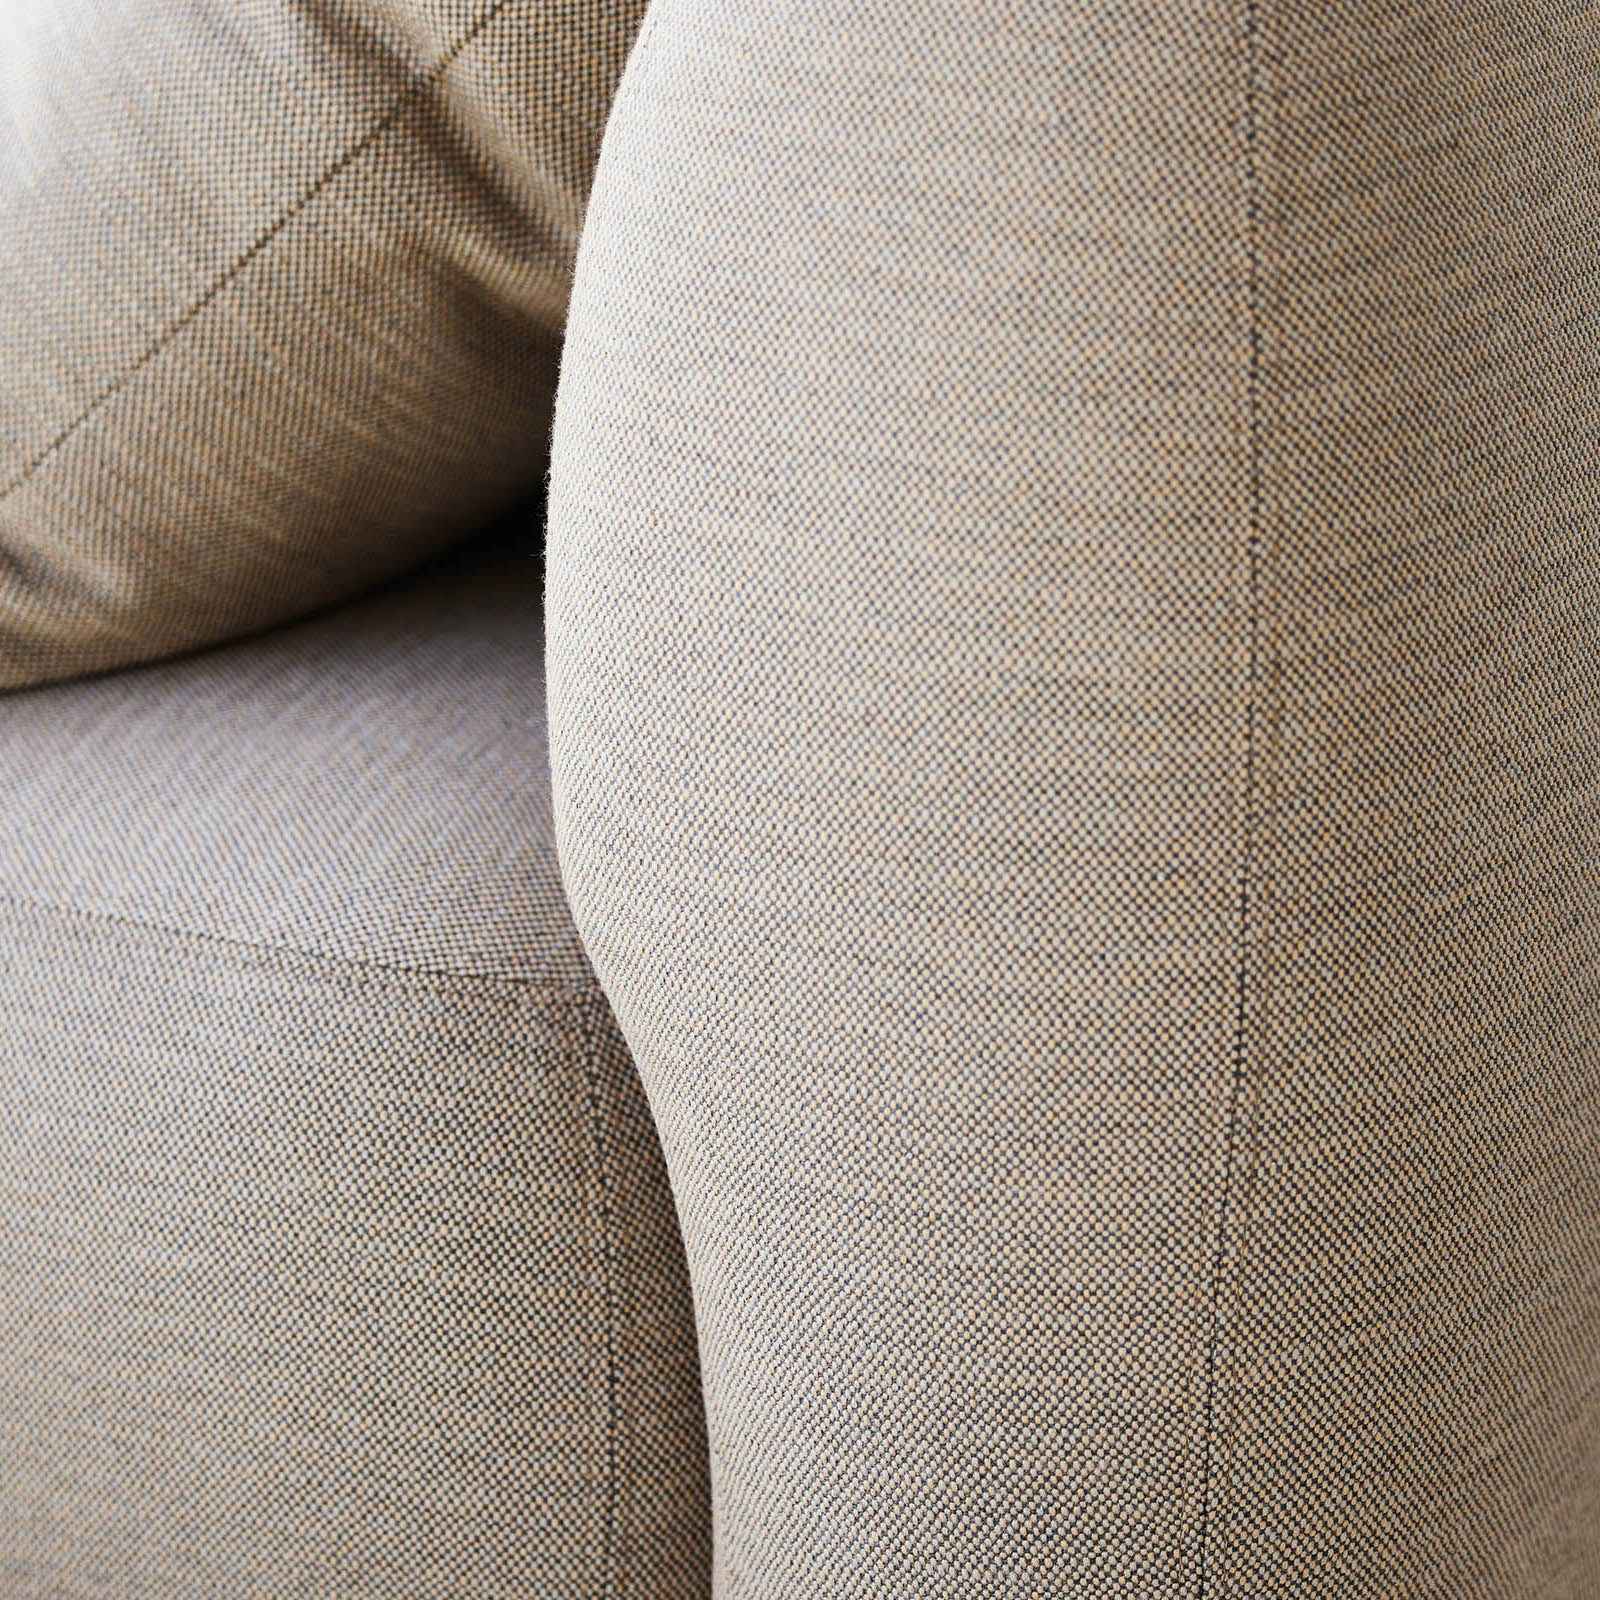 Chaiselongue ModulSofa Capture aus CL AirTouch mit QuickDry in Taupe